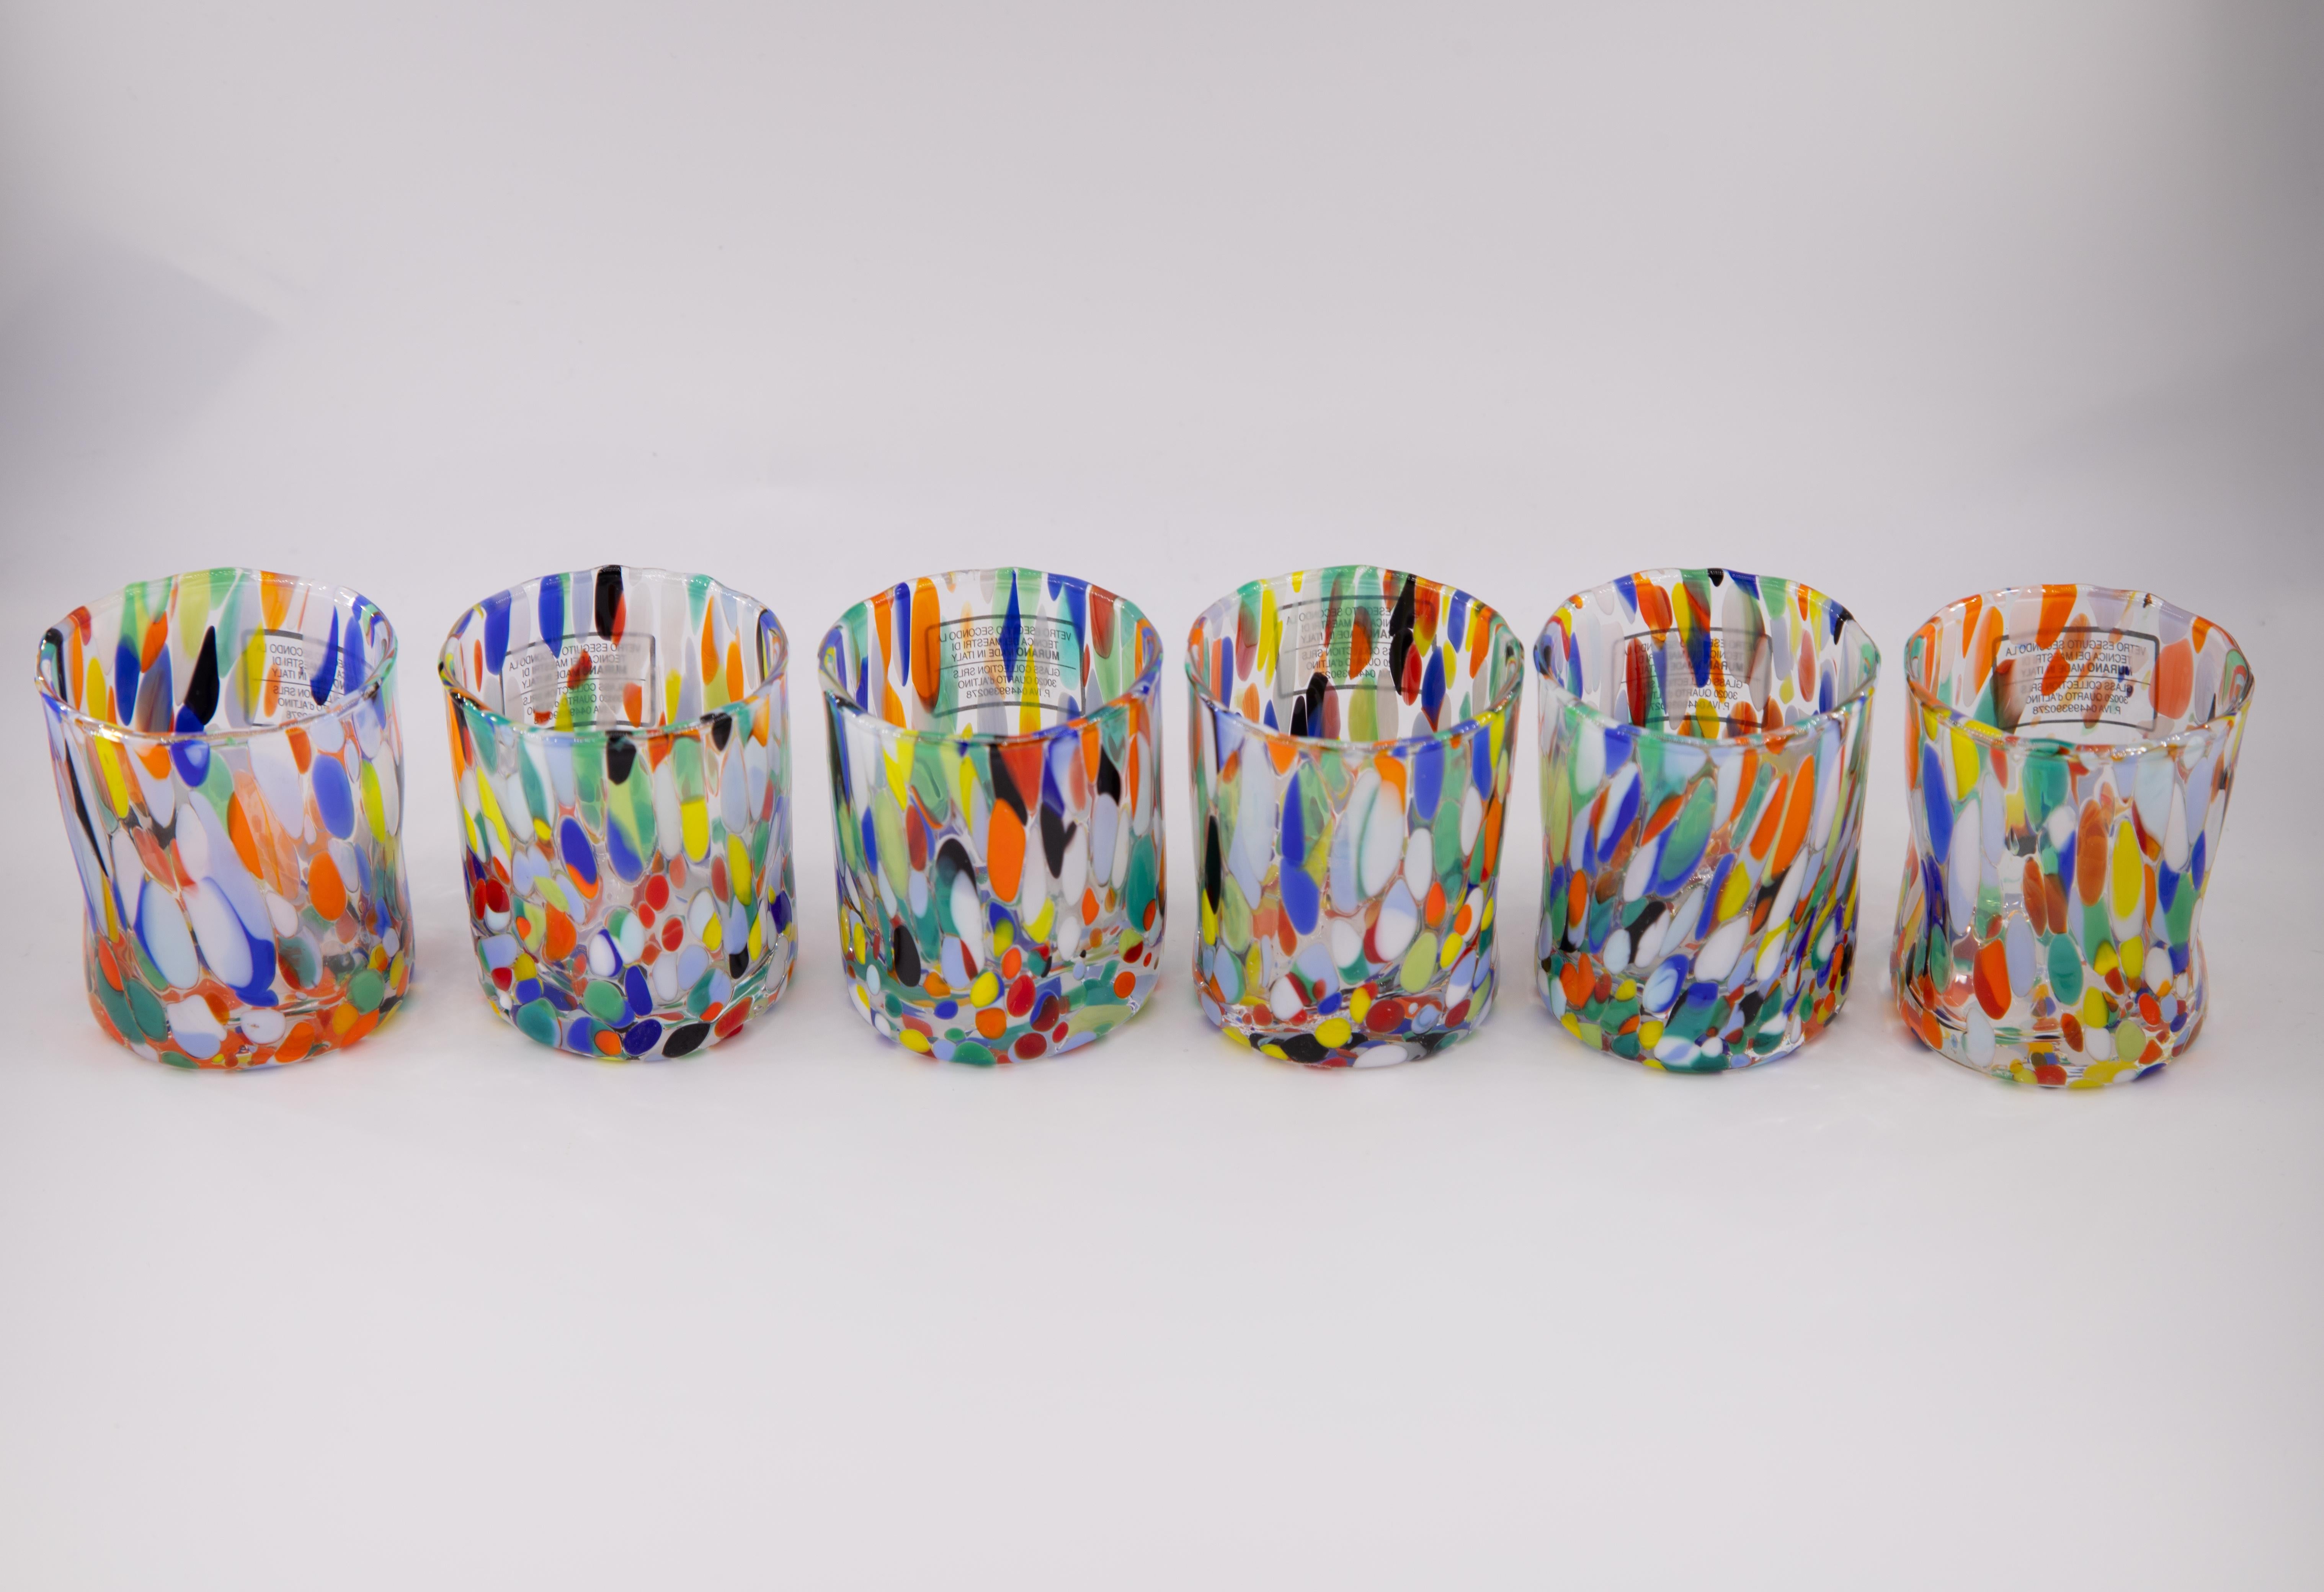 Set of six shot/coffee glasses color Arlecchino - Murano glass - Made in Italy.

These individual Murano glasses are inspired by the classic 